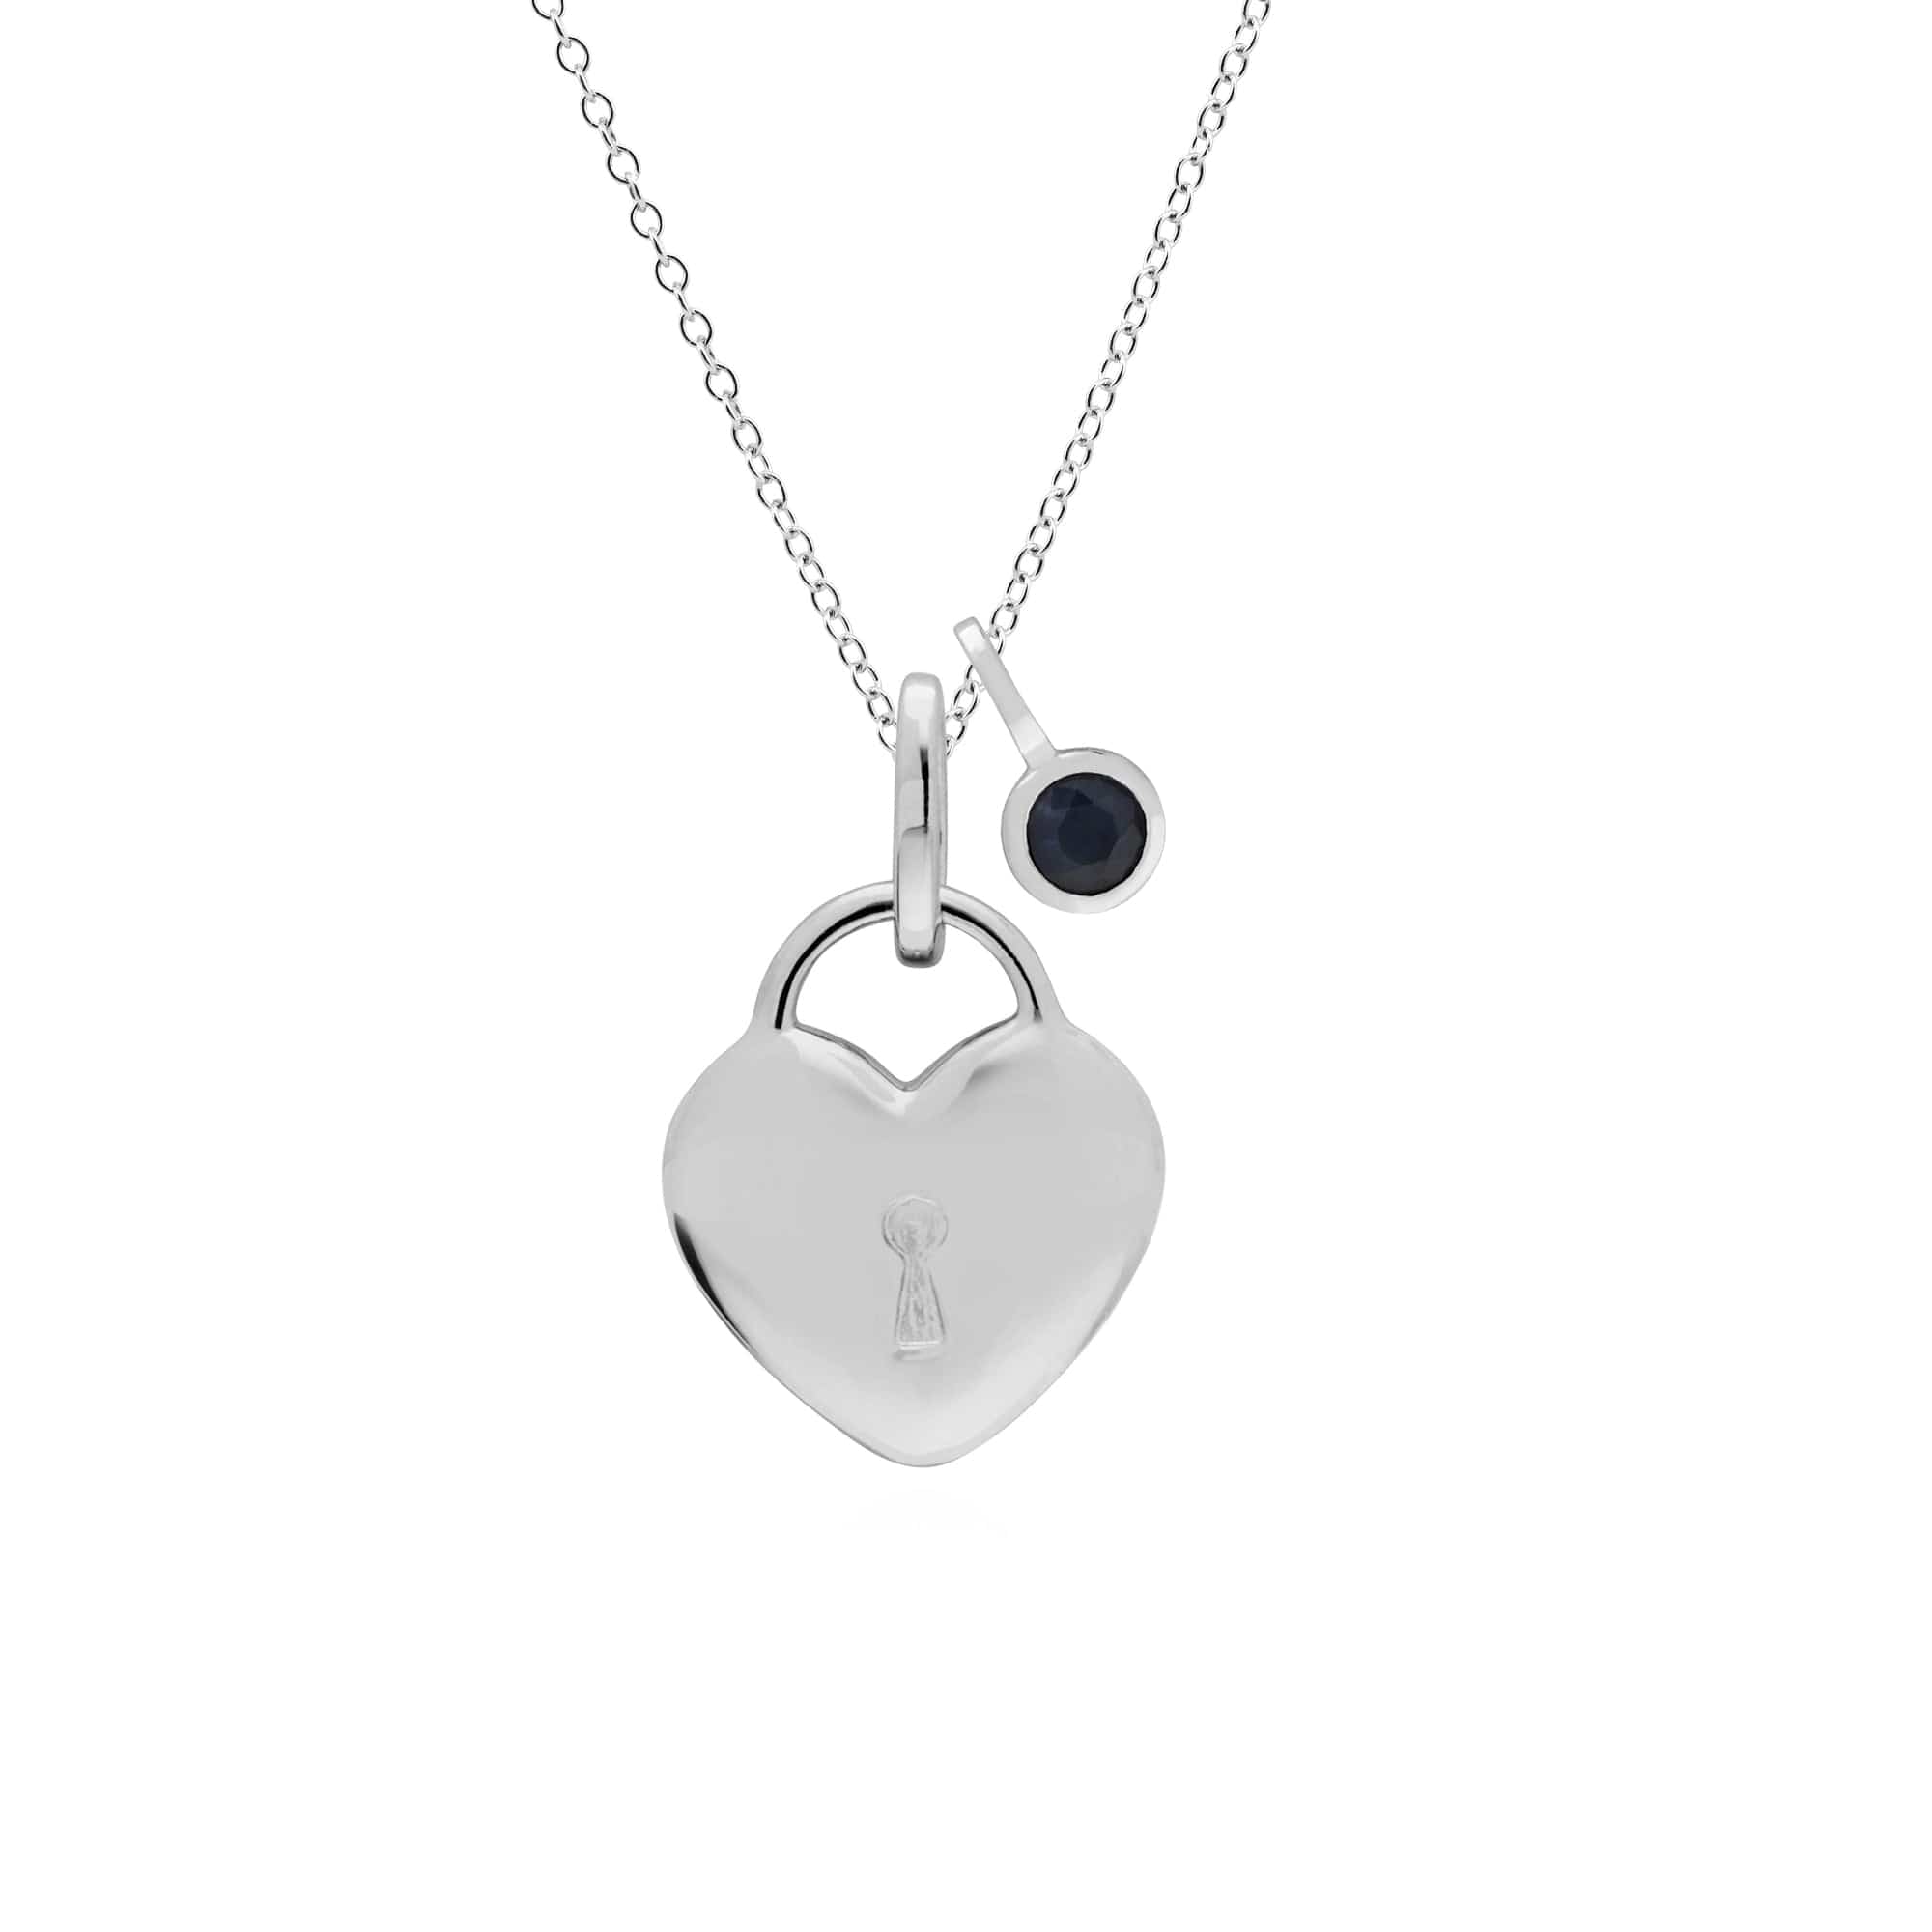 270P027610925-270P027001925 Classic Heart Lock Pendant & Sapphire Charm in 925 Sterling Silver 1